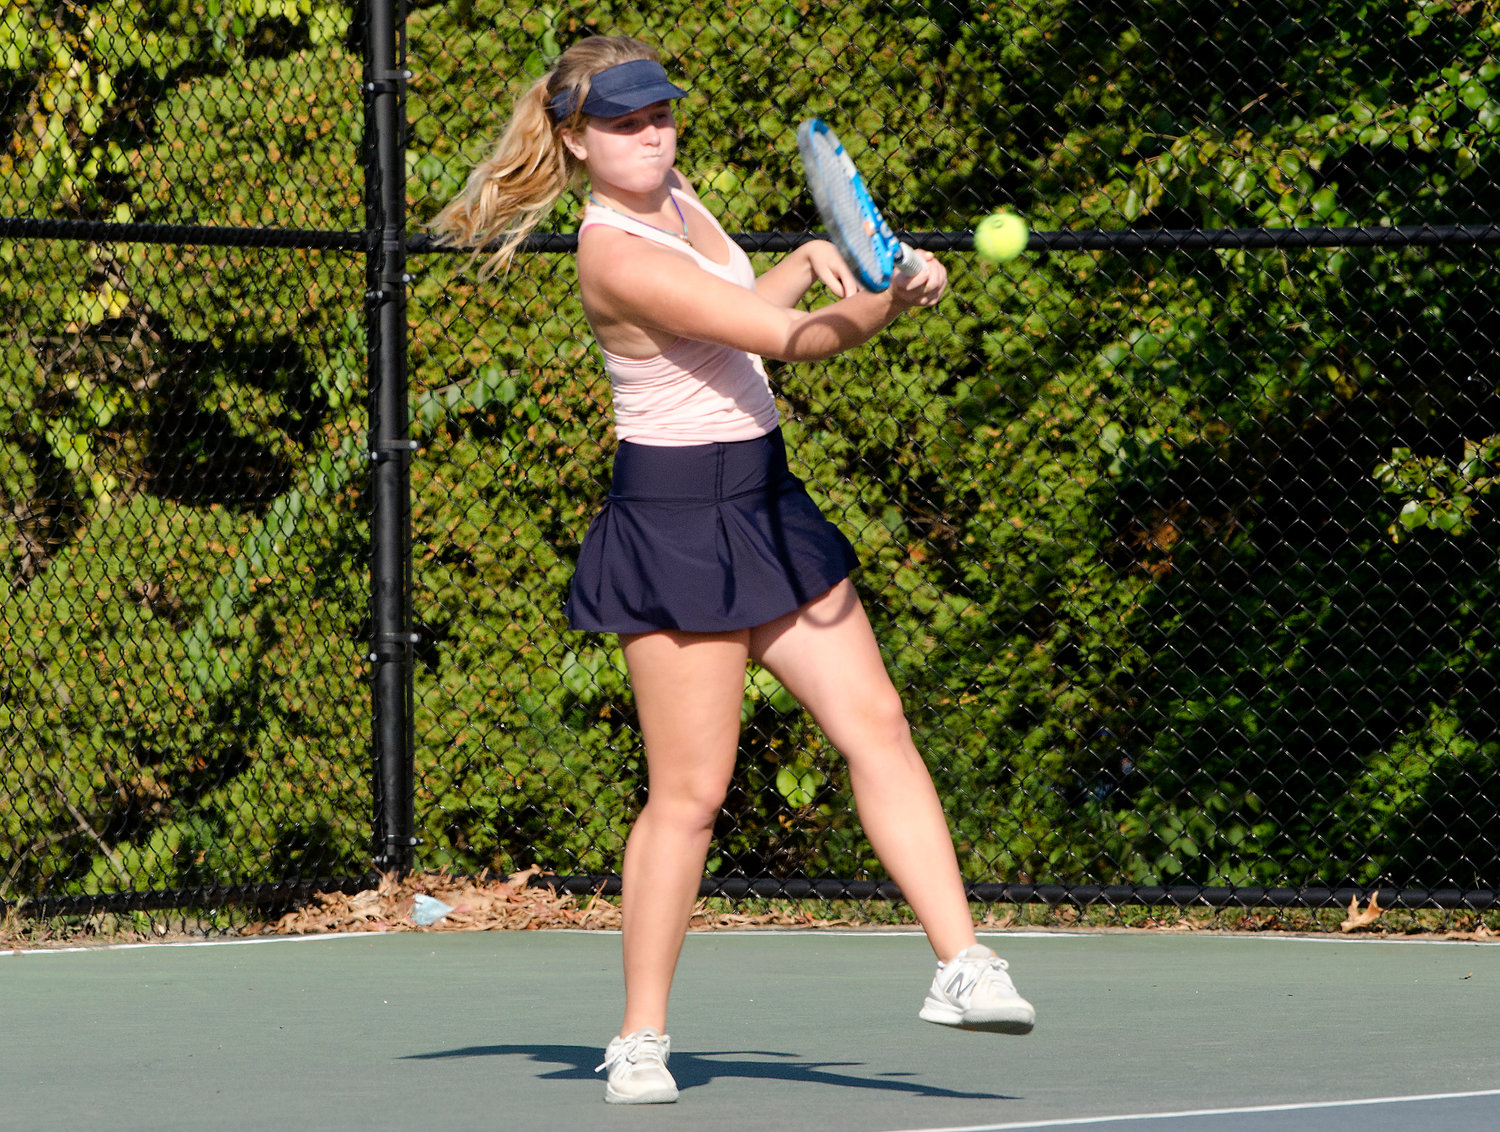 Caroline Maher, shown hitting a forehand shot, played a challenge match against teammate Kate Robertson. Caroline and Kate are two of the Eagles' top players.